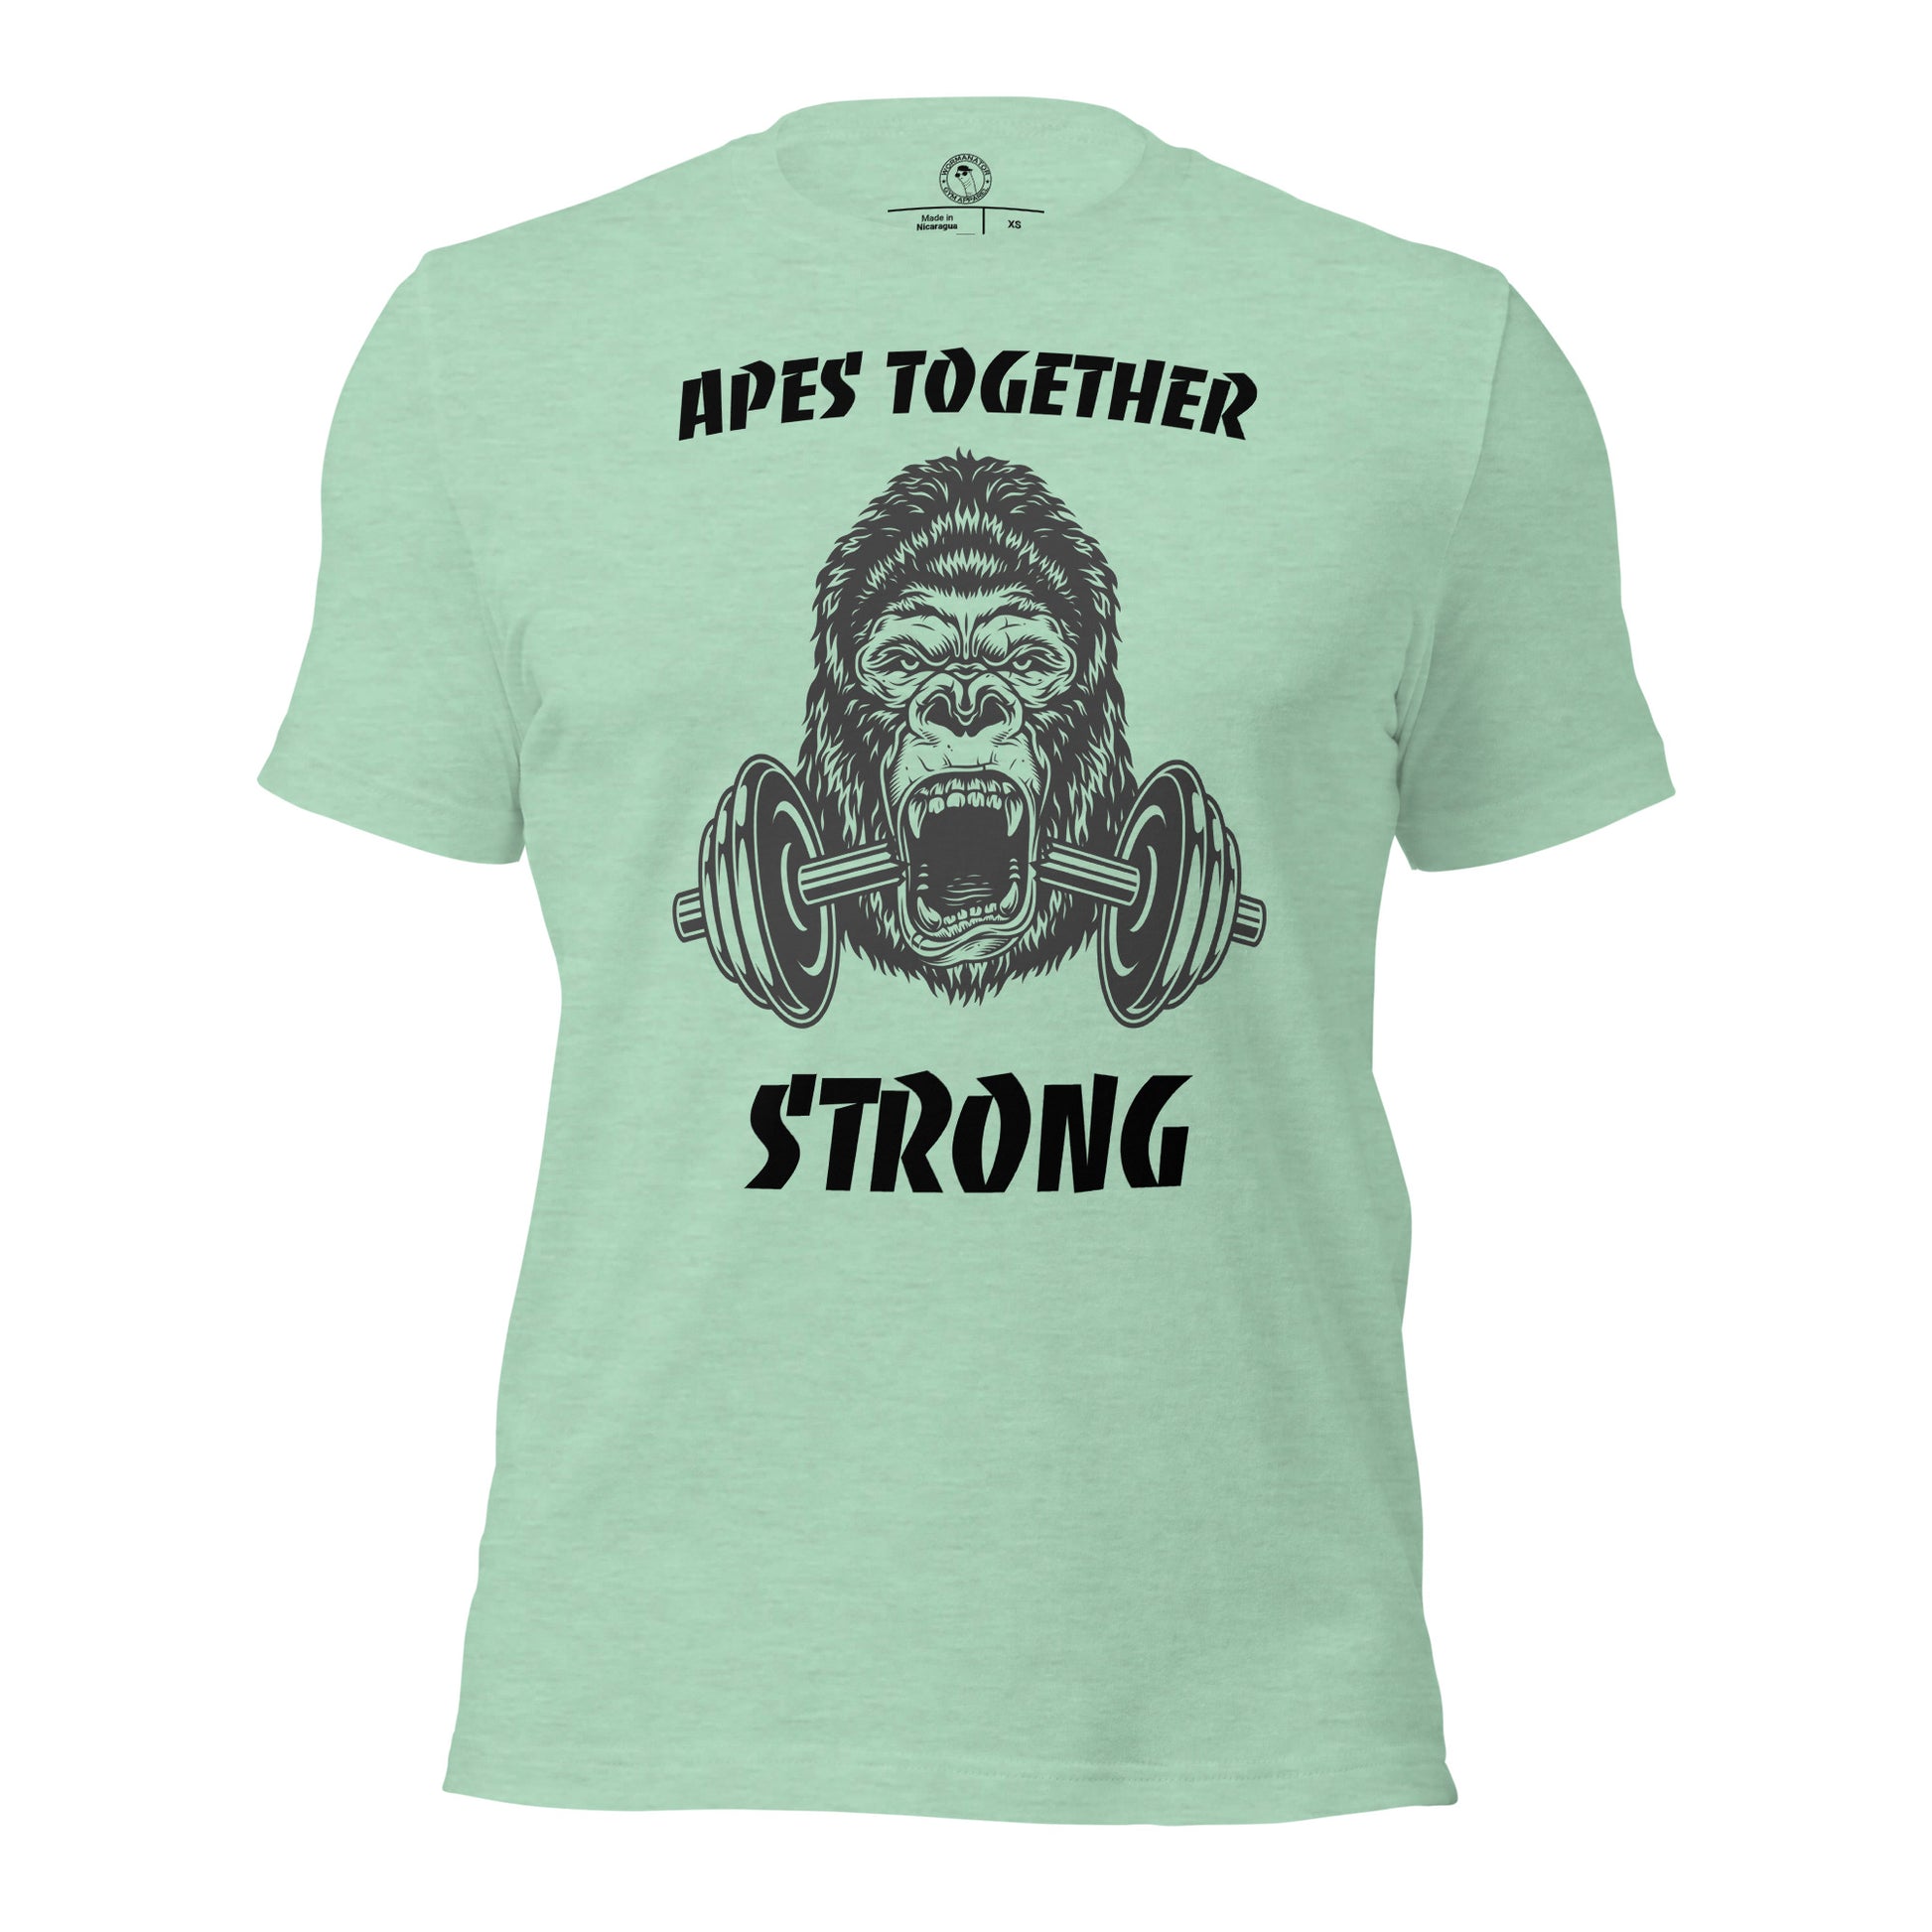 Apes Together Strong Shirt in Heather Prism Mint